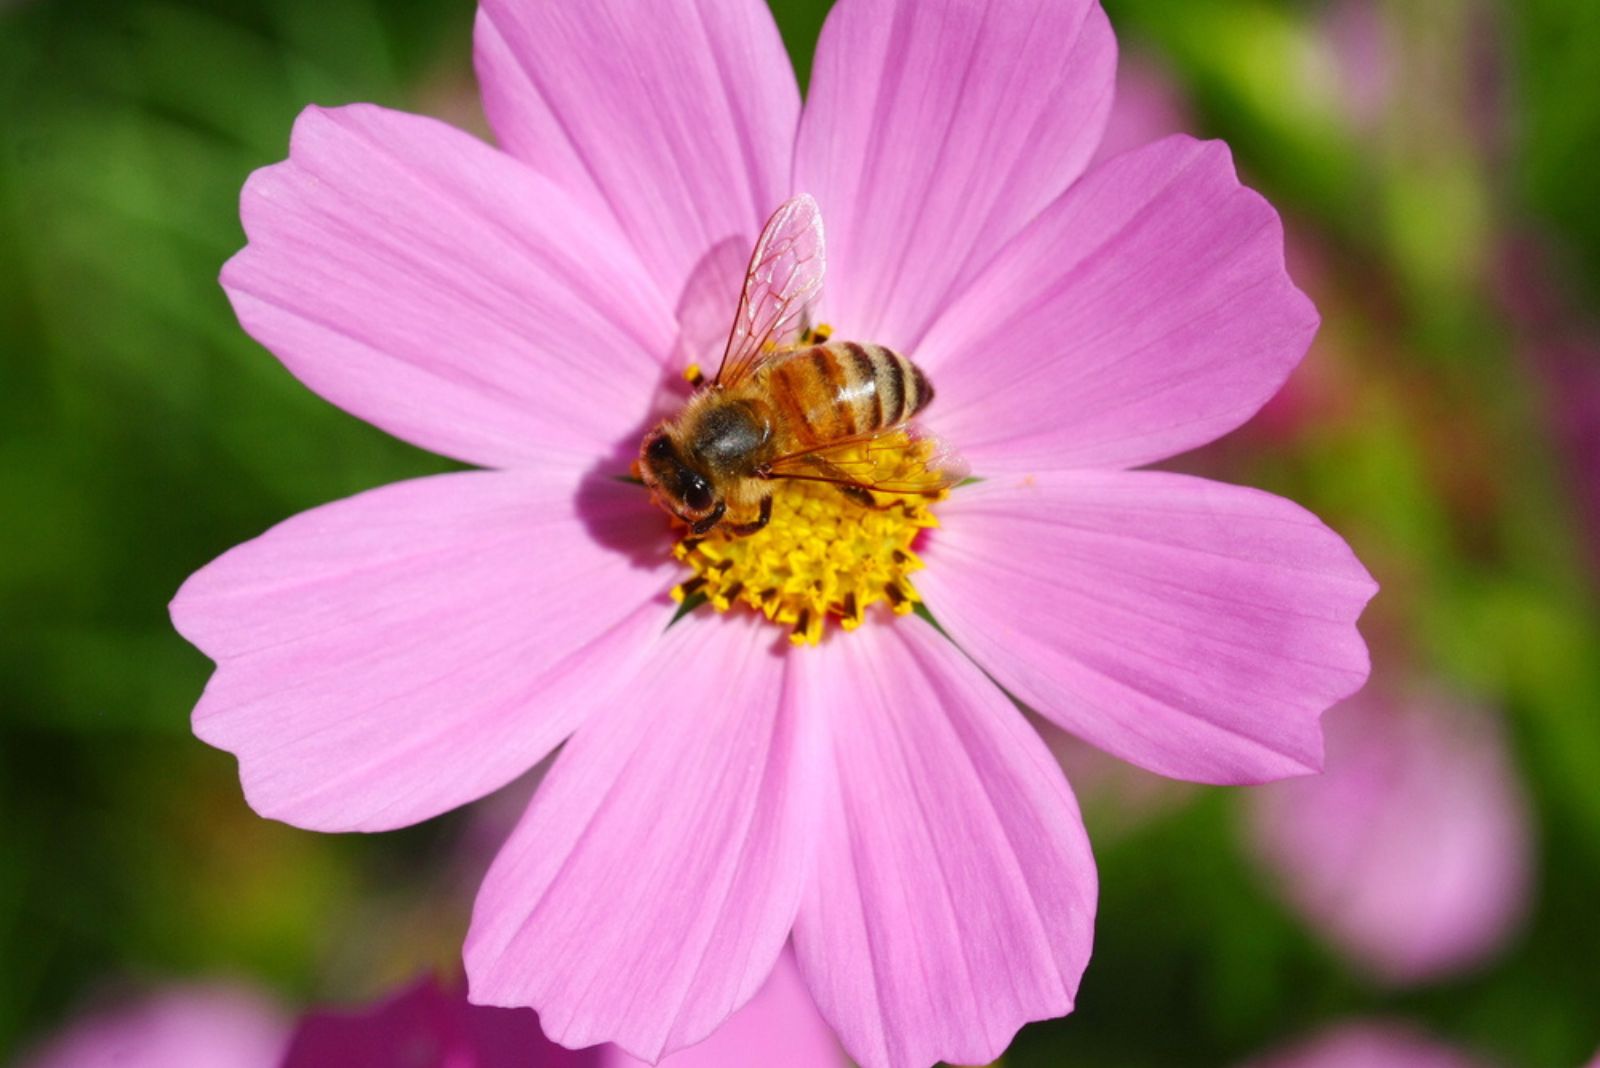 cosmos flower with a bee on it